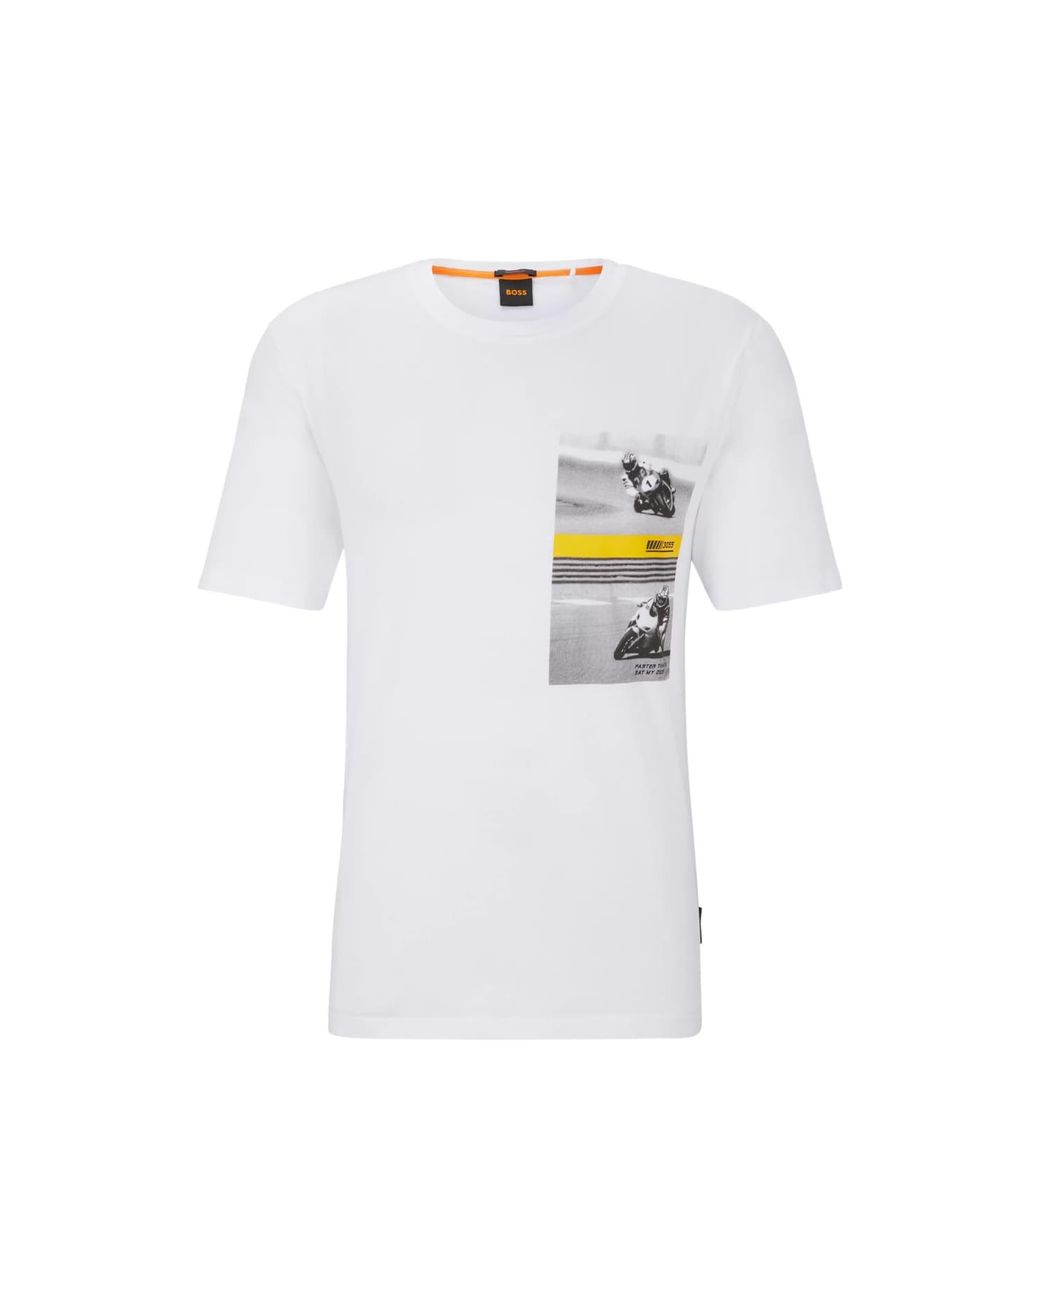 BOSS by HUGO BOSS Teemotor Graphic T-shirt Size: Xl, Col: White | Lyst